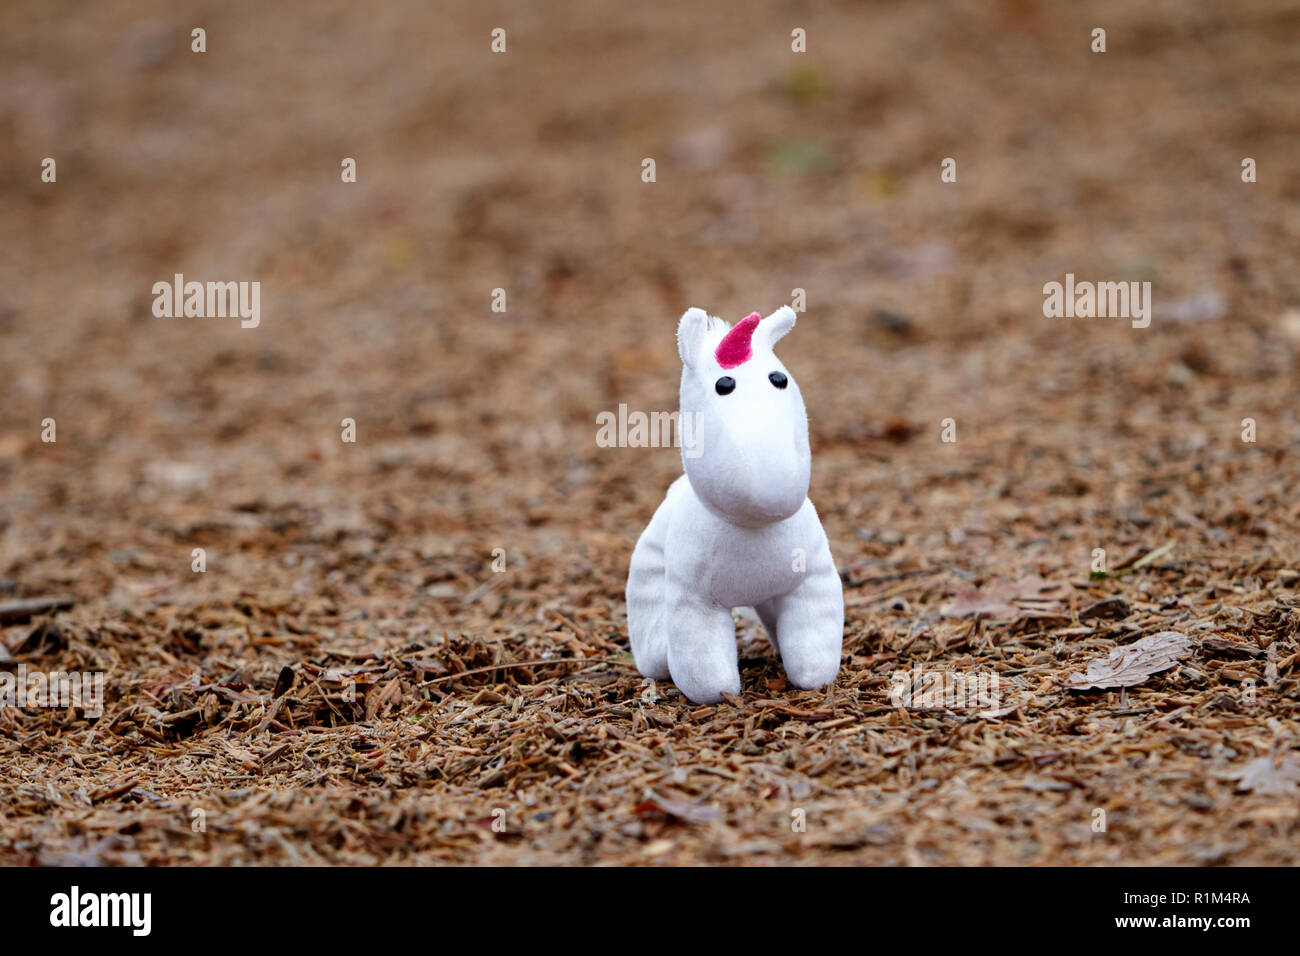 Little girl childs soft toy unicorn lost in a childrens playground Stock Photo